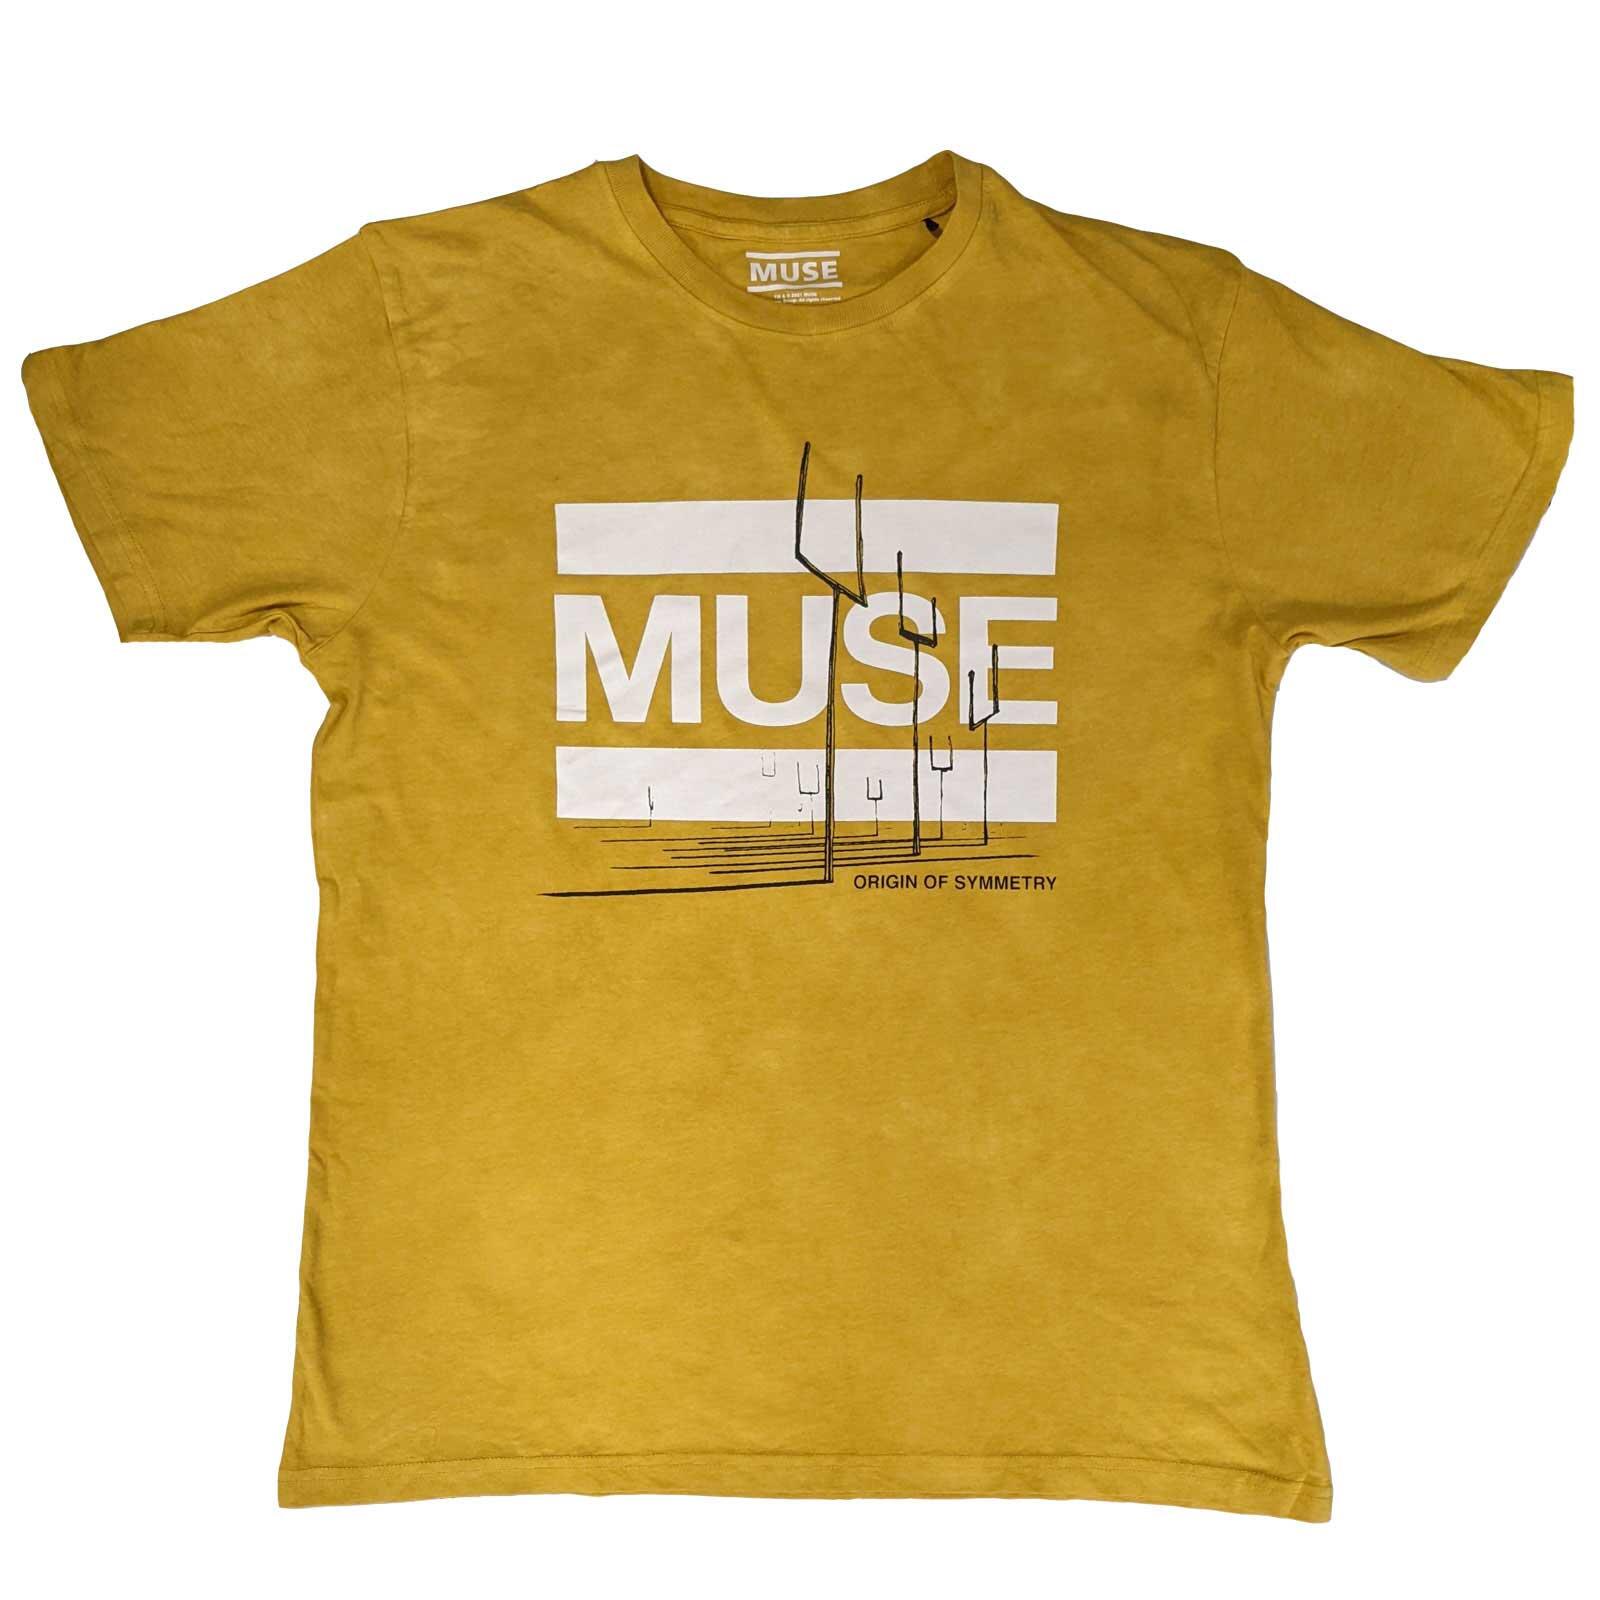 Rockoff MUSE Unisex T-Shirt: Origin of Symmetry (Wash Collection) Size XL : photo 1